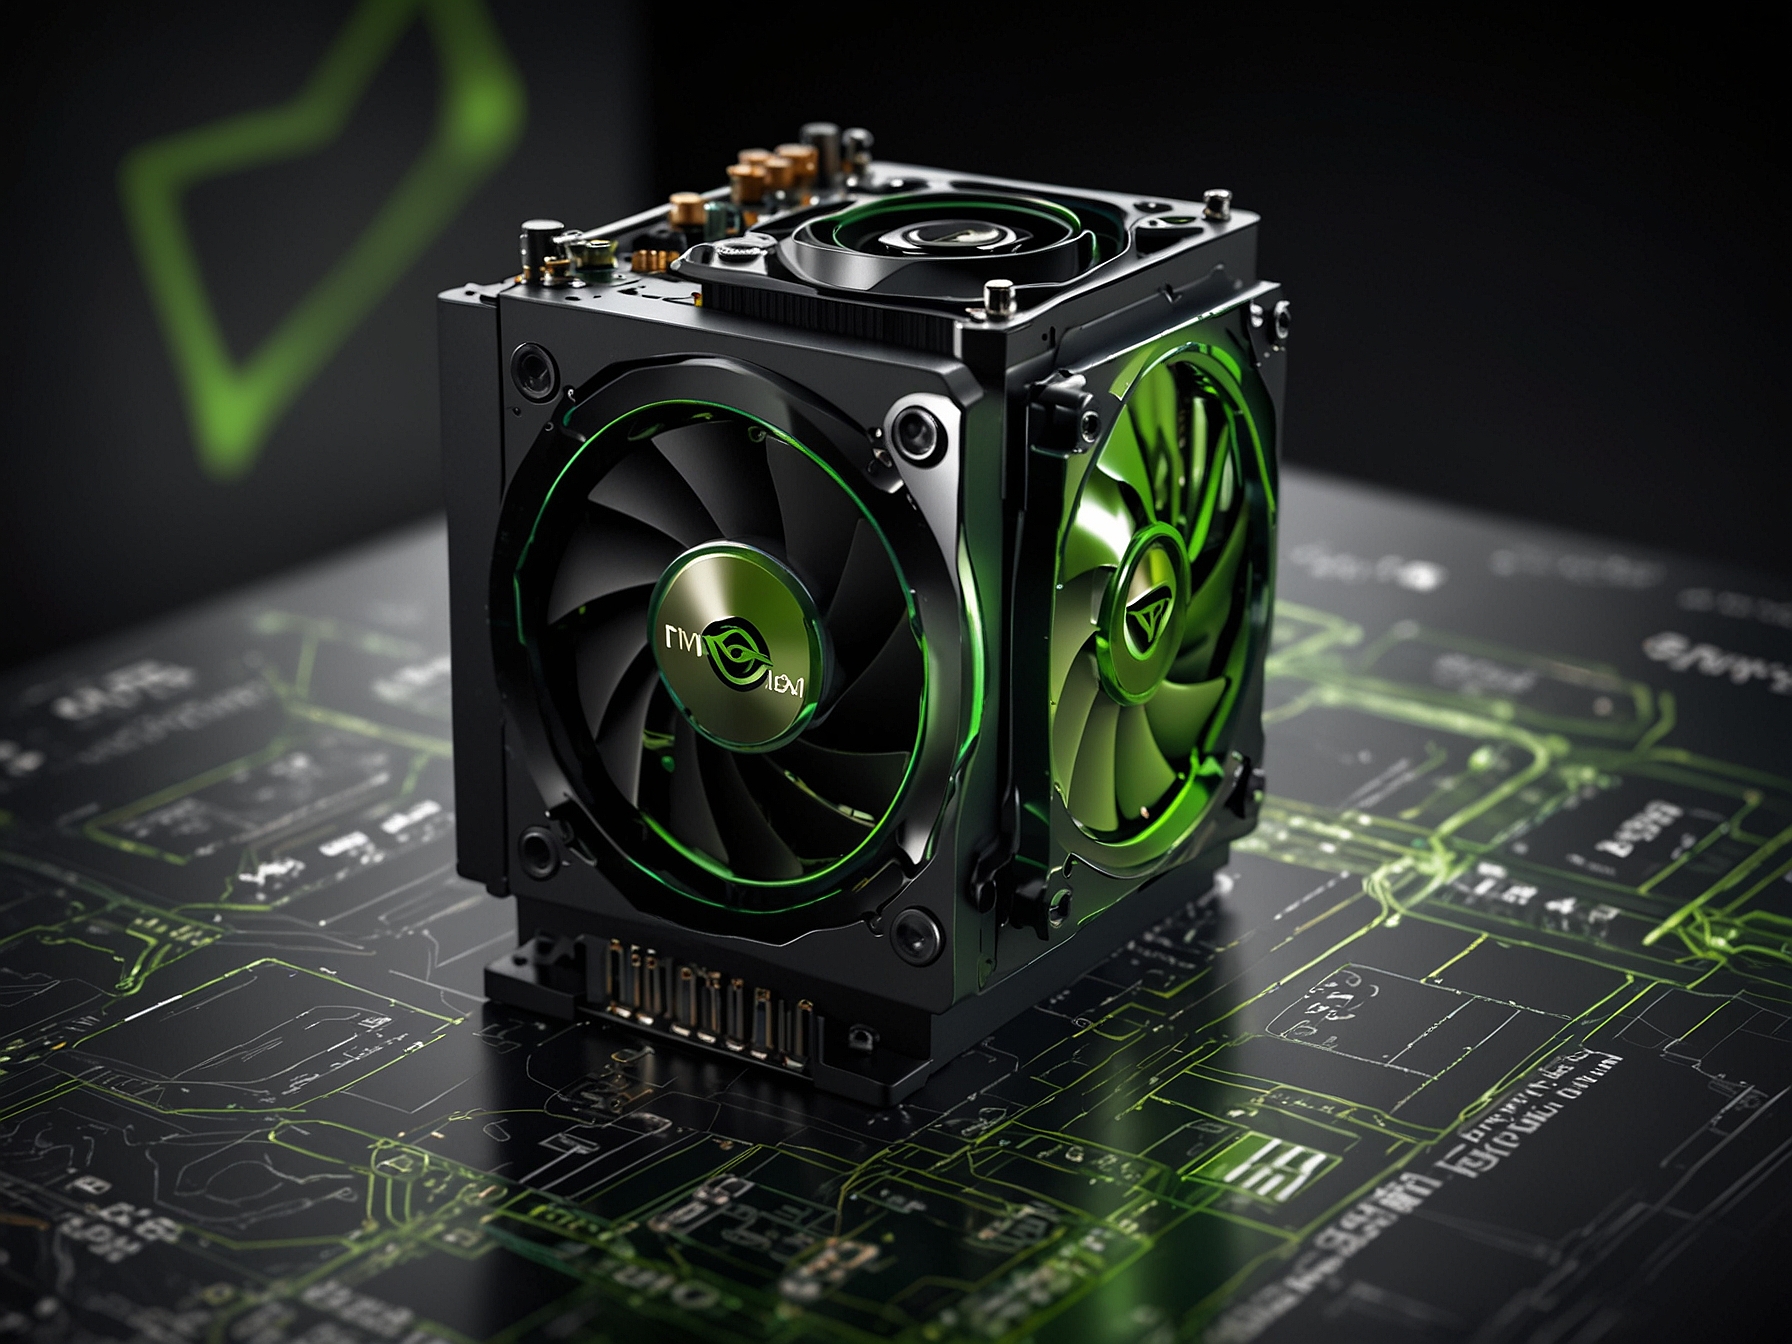 Graphic showcasing Nvidia's leadership in AI and GPU technology, emphasizing its role in gaming, deep learning, and modern tech innovations driving its market growth.